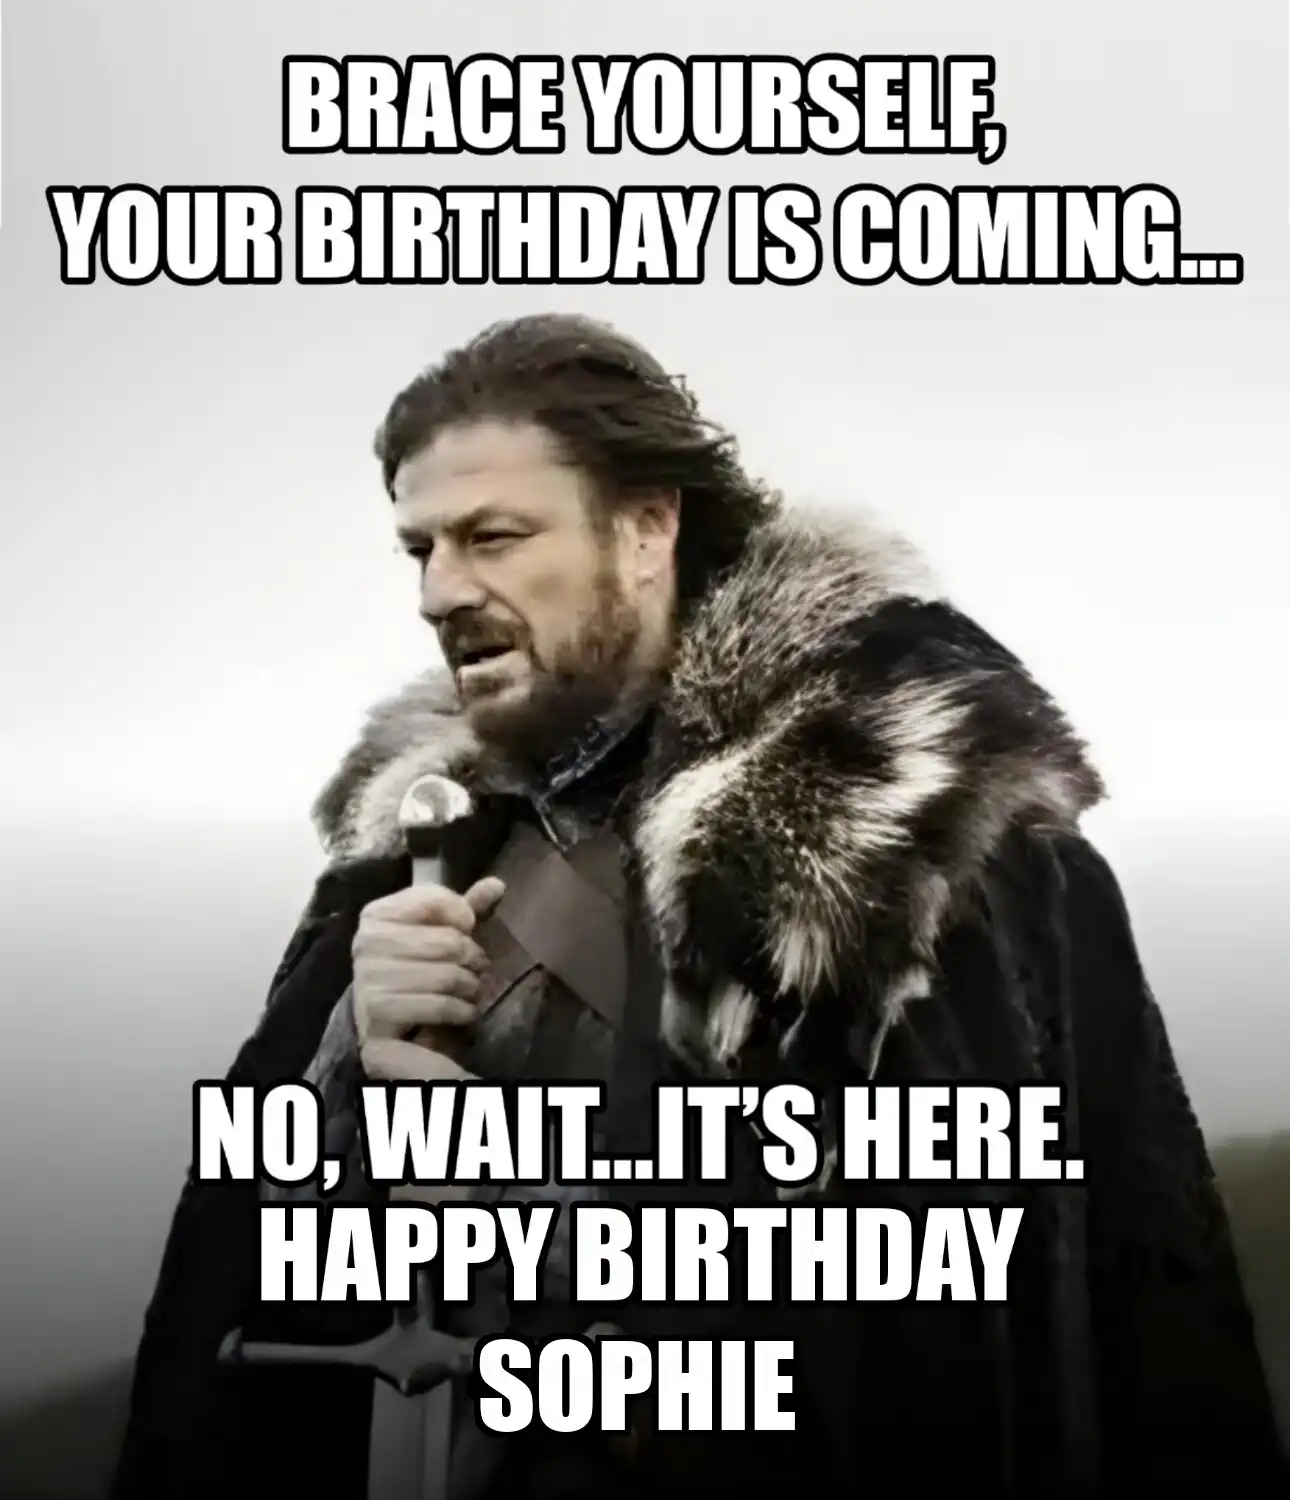 Happy Birthday Sophie Brace Yourself Your Birthday Is Coming Meme